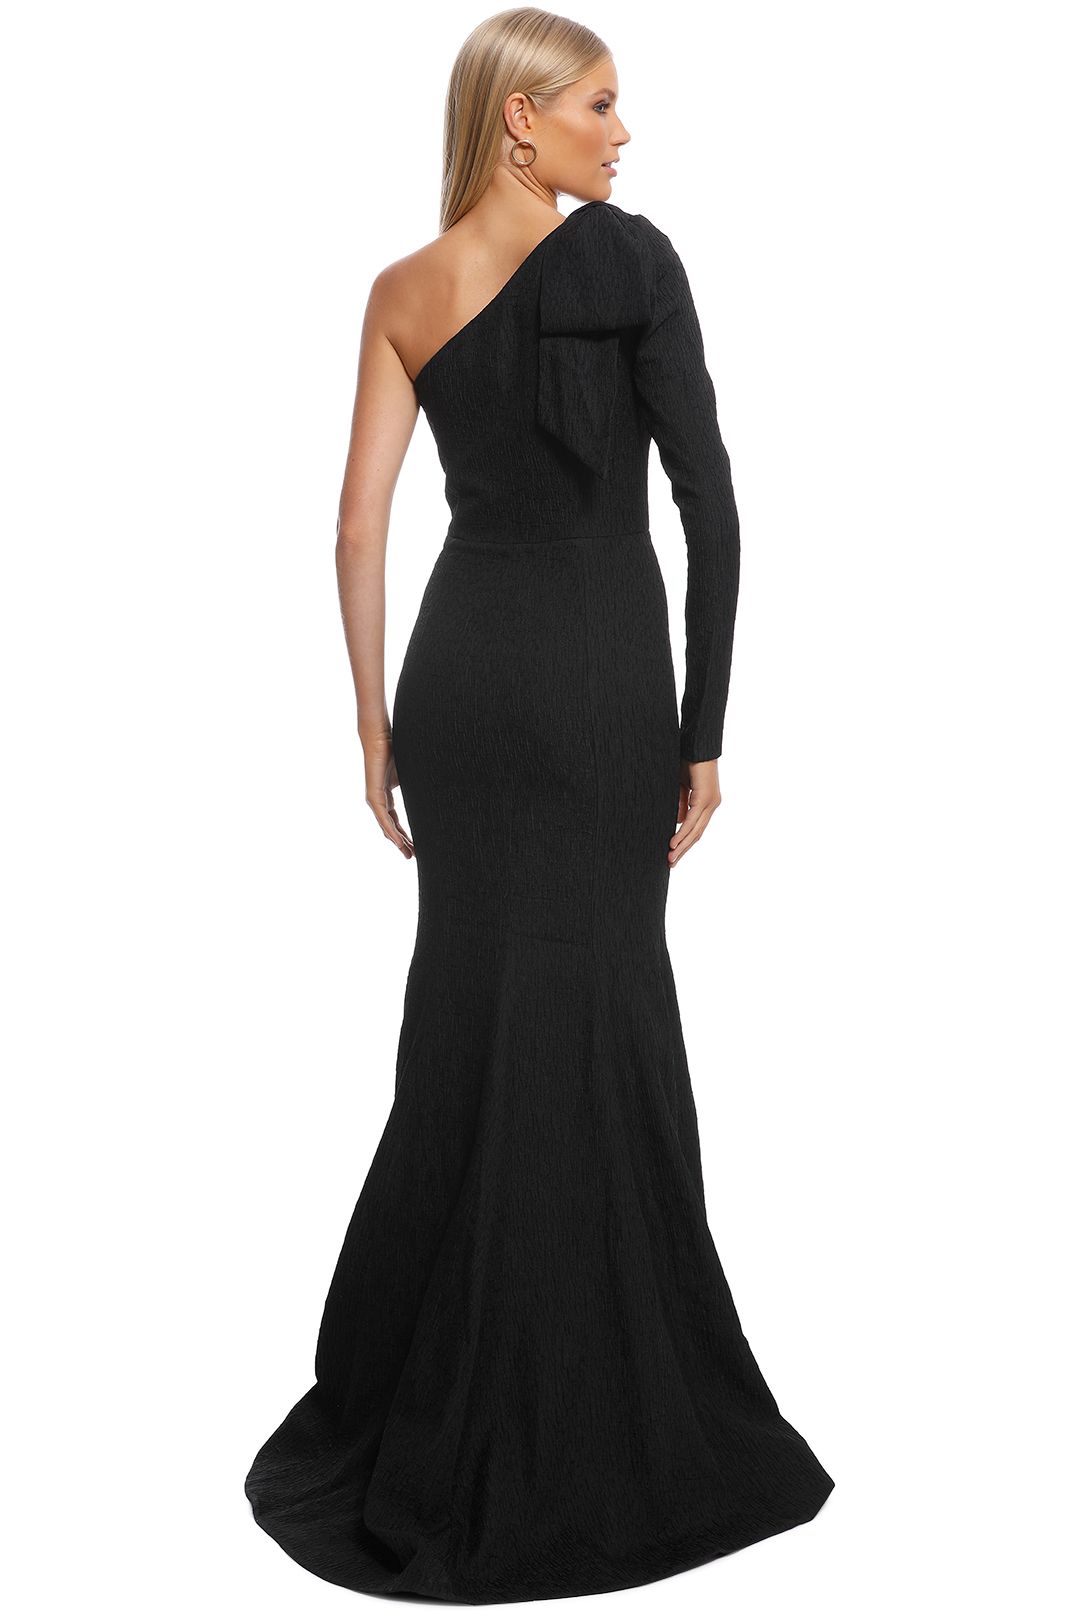 Rebecca Vallance - Harlow Bow Gown - Black - Back